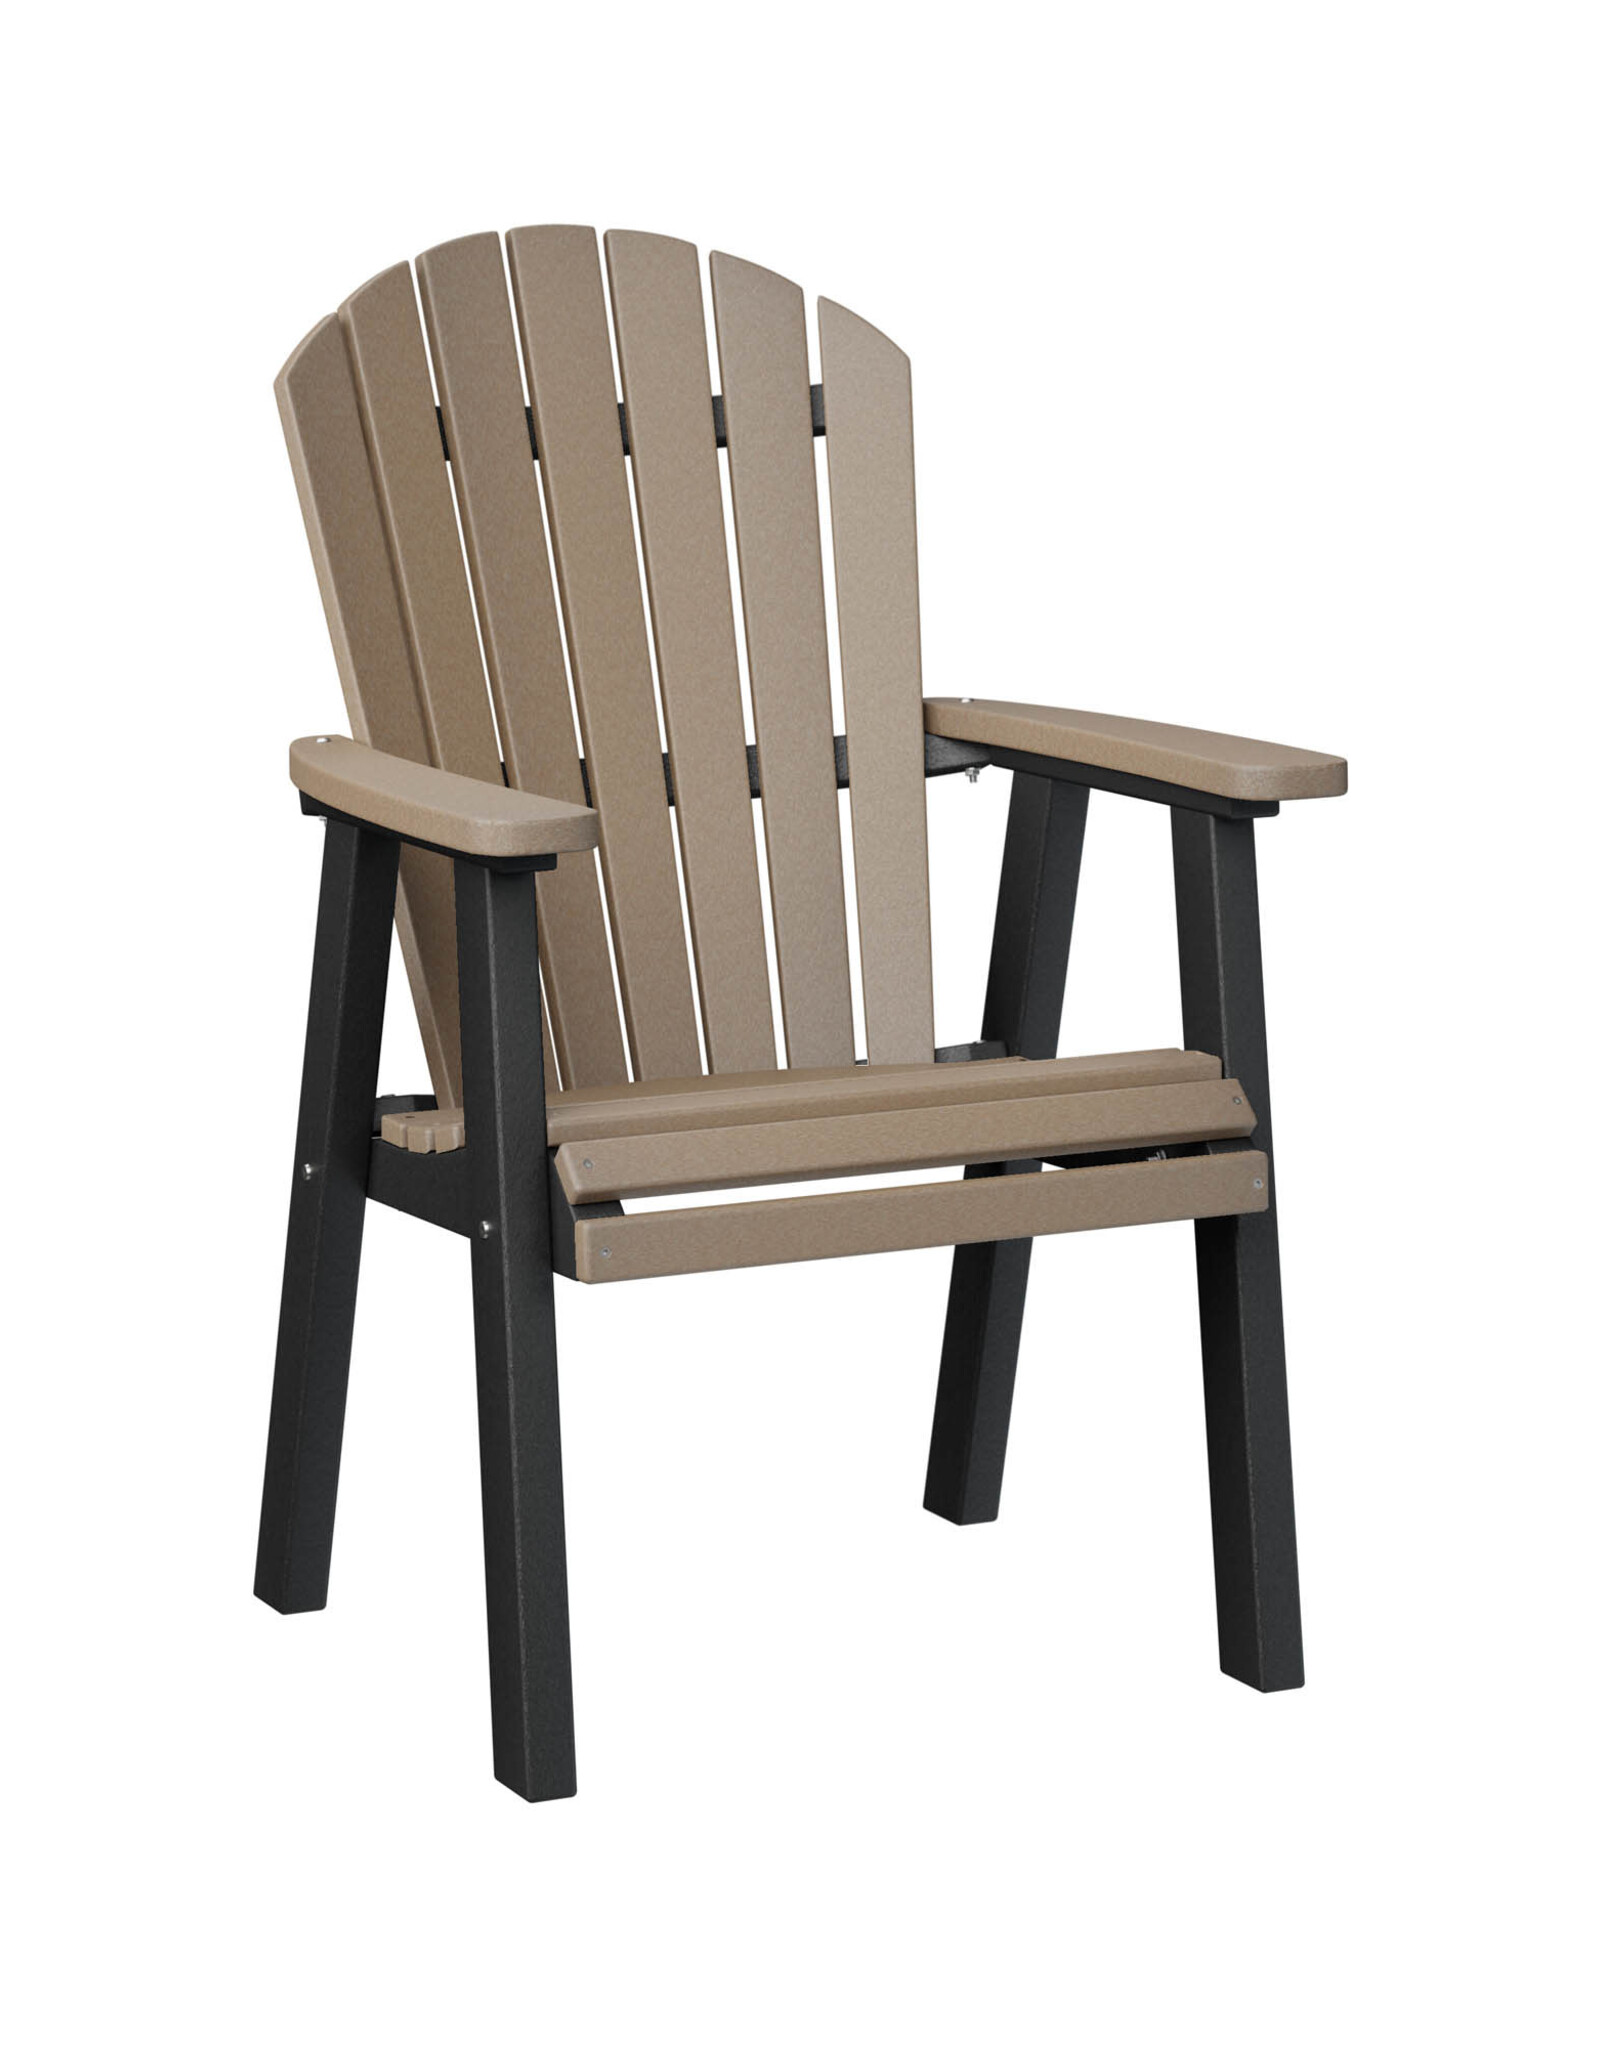 Berlin Gardens Comfo Back Dining Chair